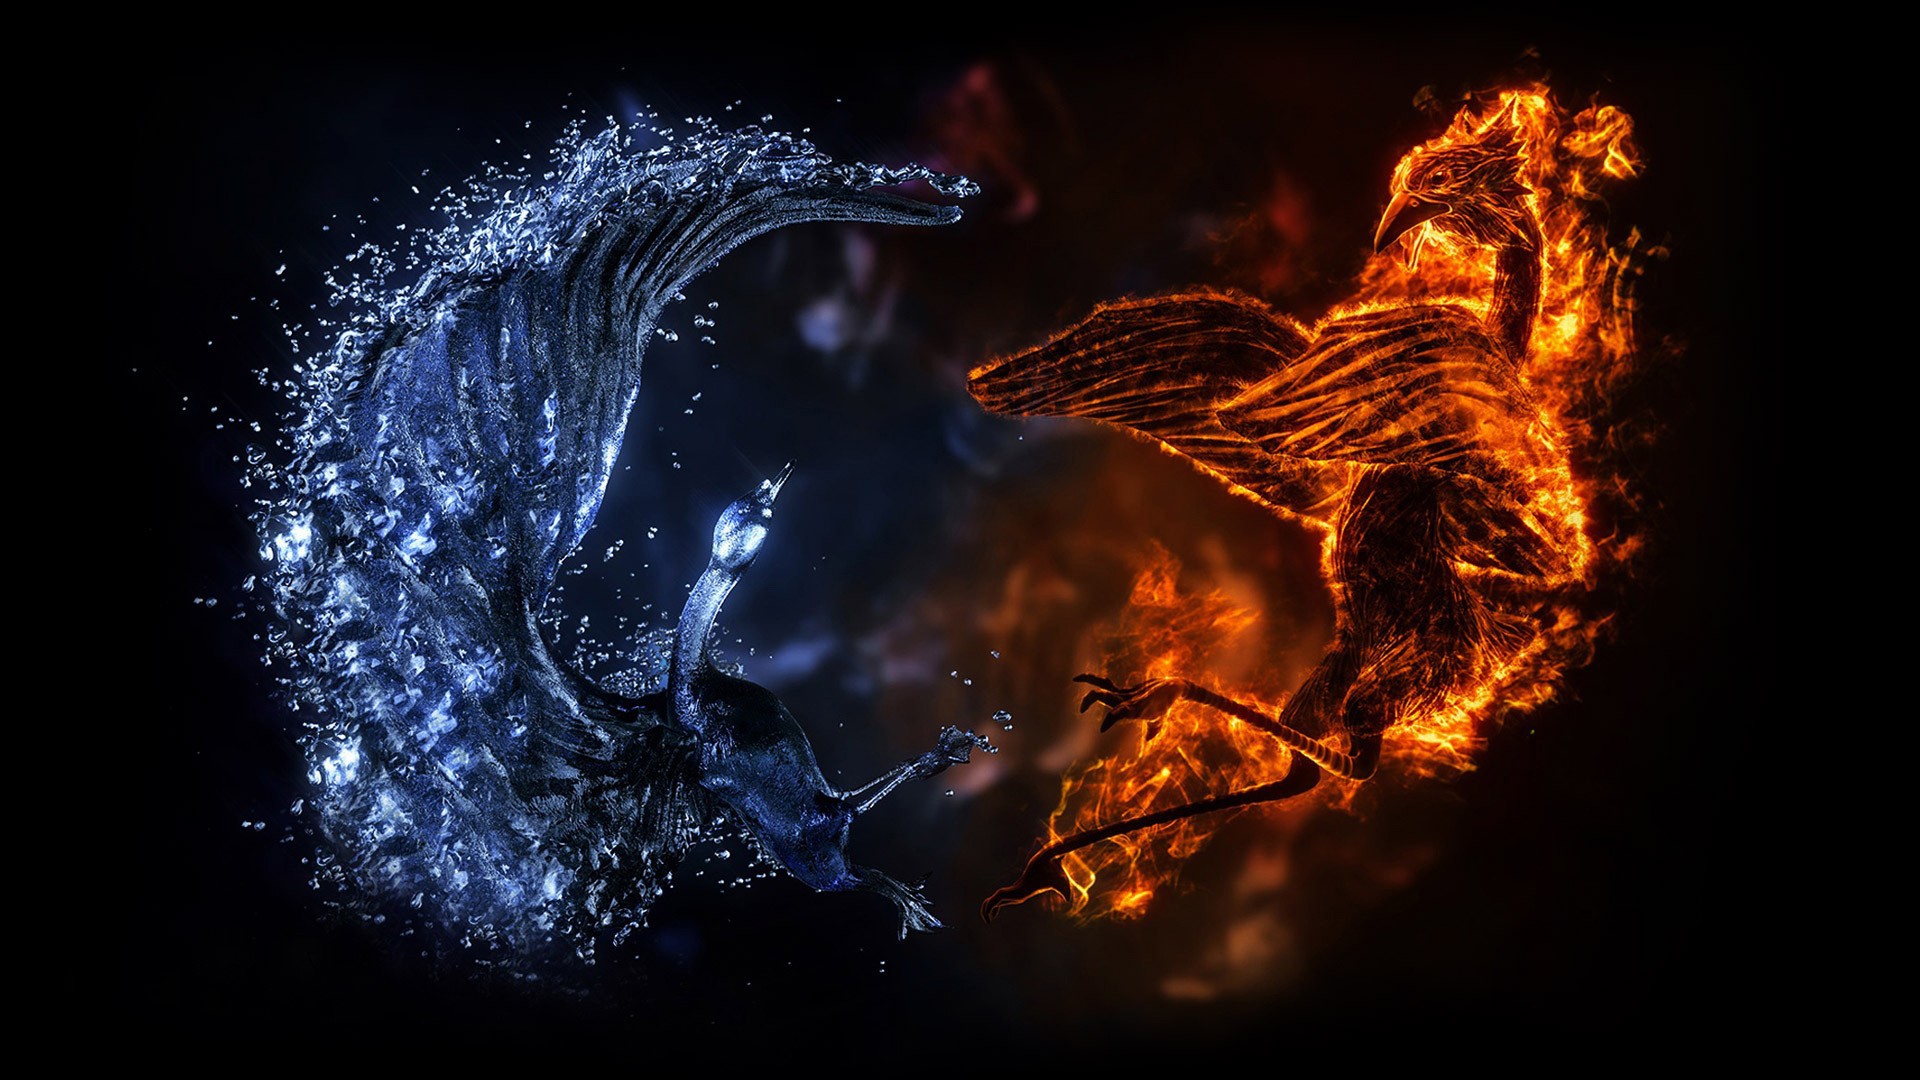 Battle of fire and water dragons wallpapers and images